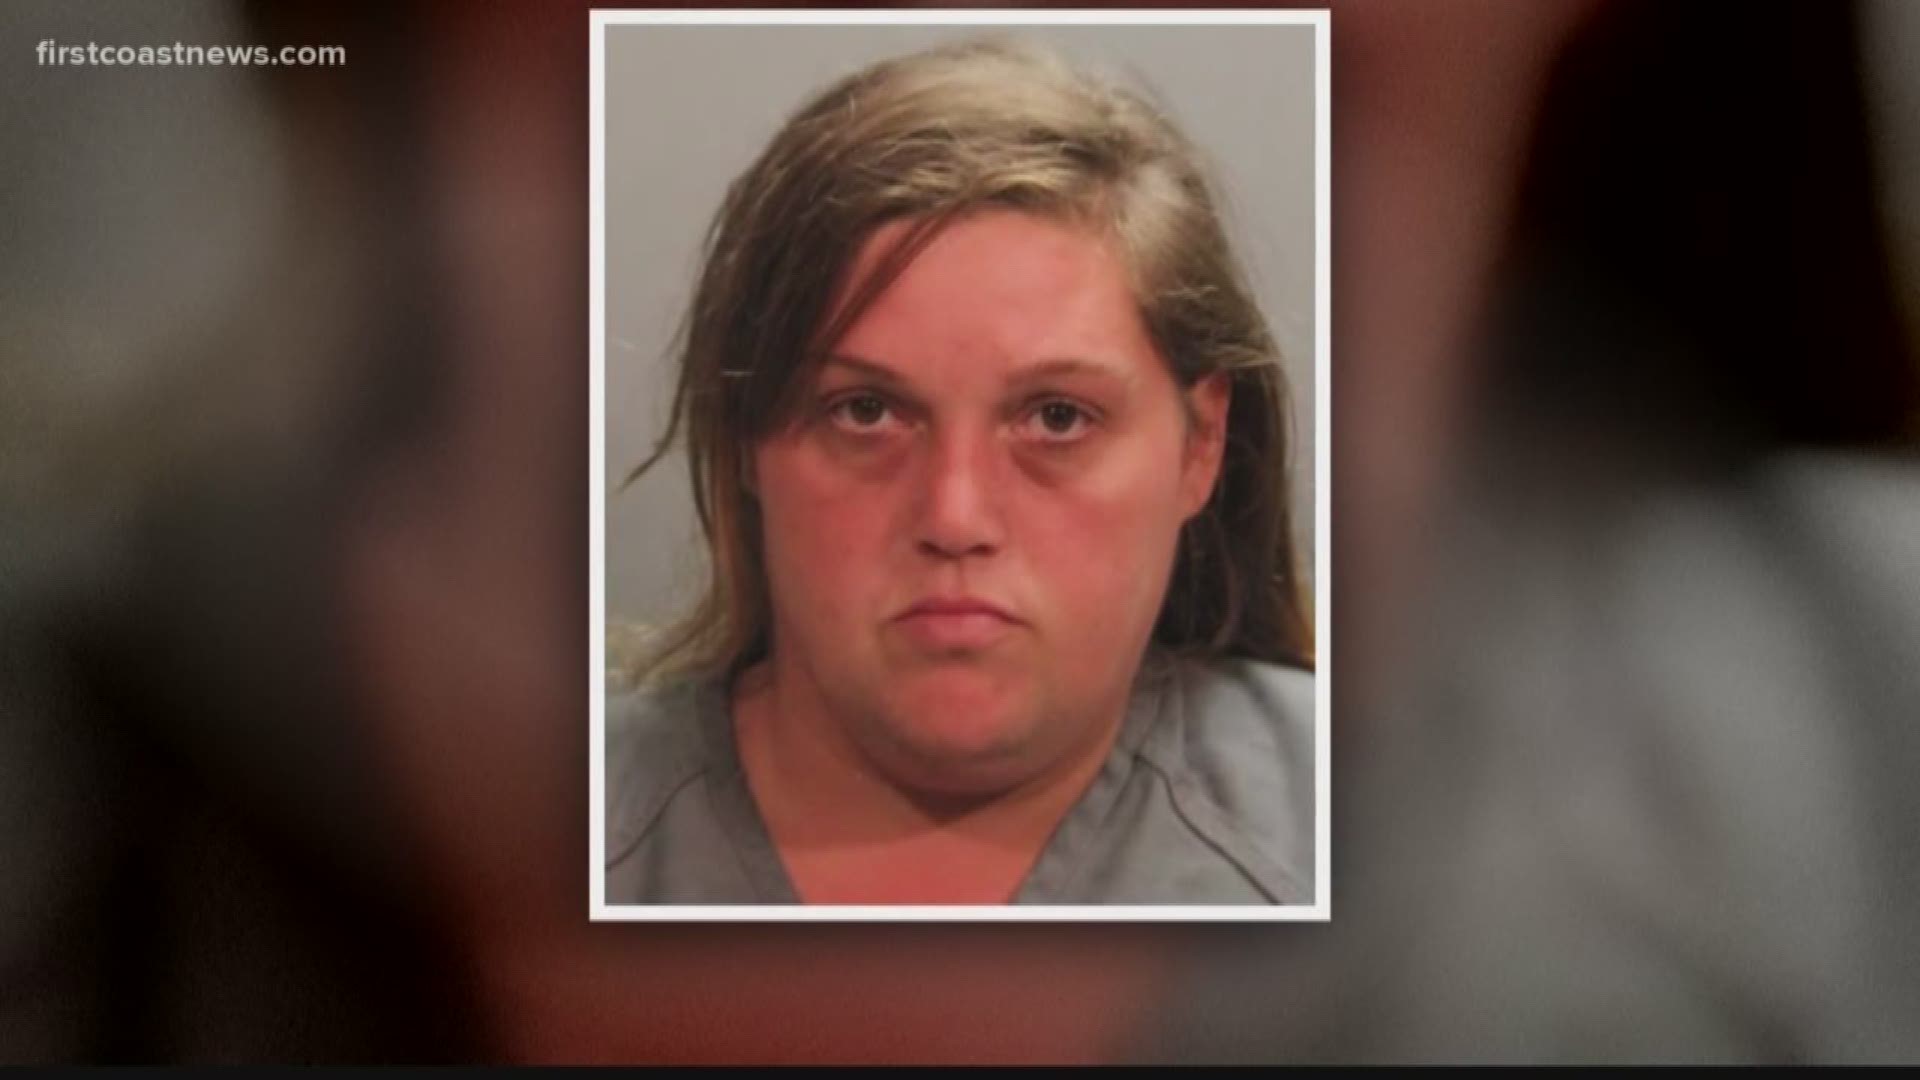 Jacksonville Woman Arrested In Bank Robbery After Claiming She Was Being Forced To Do It 8051